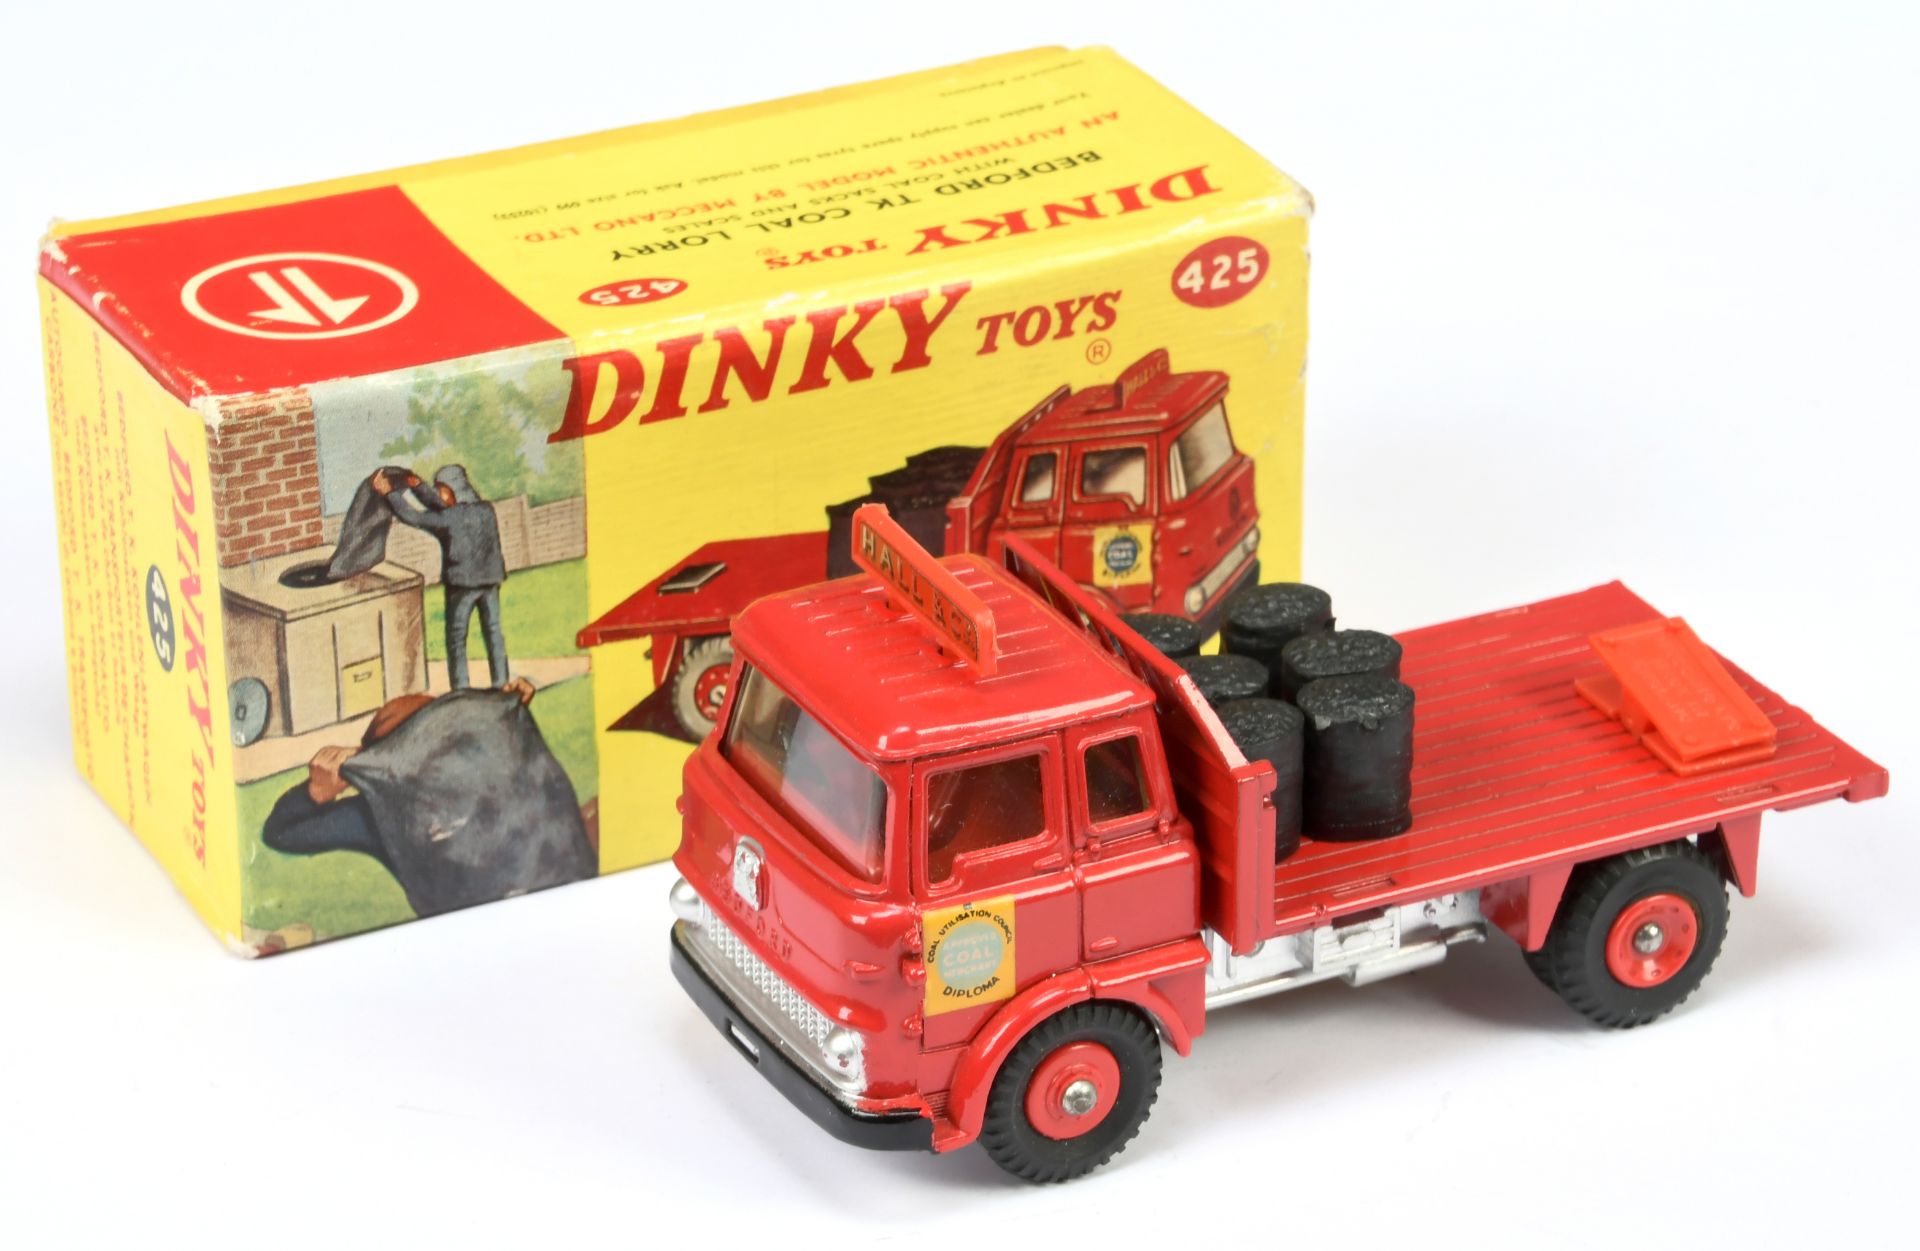 Dinky Toys 425 Bedford TK Coal Truck "Hall & Co Ltd" - Red cab, back and interior (harder variati...